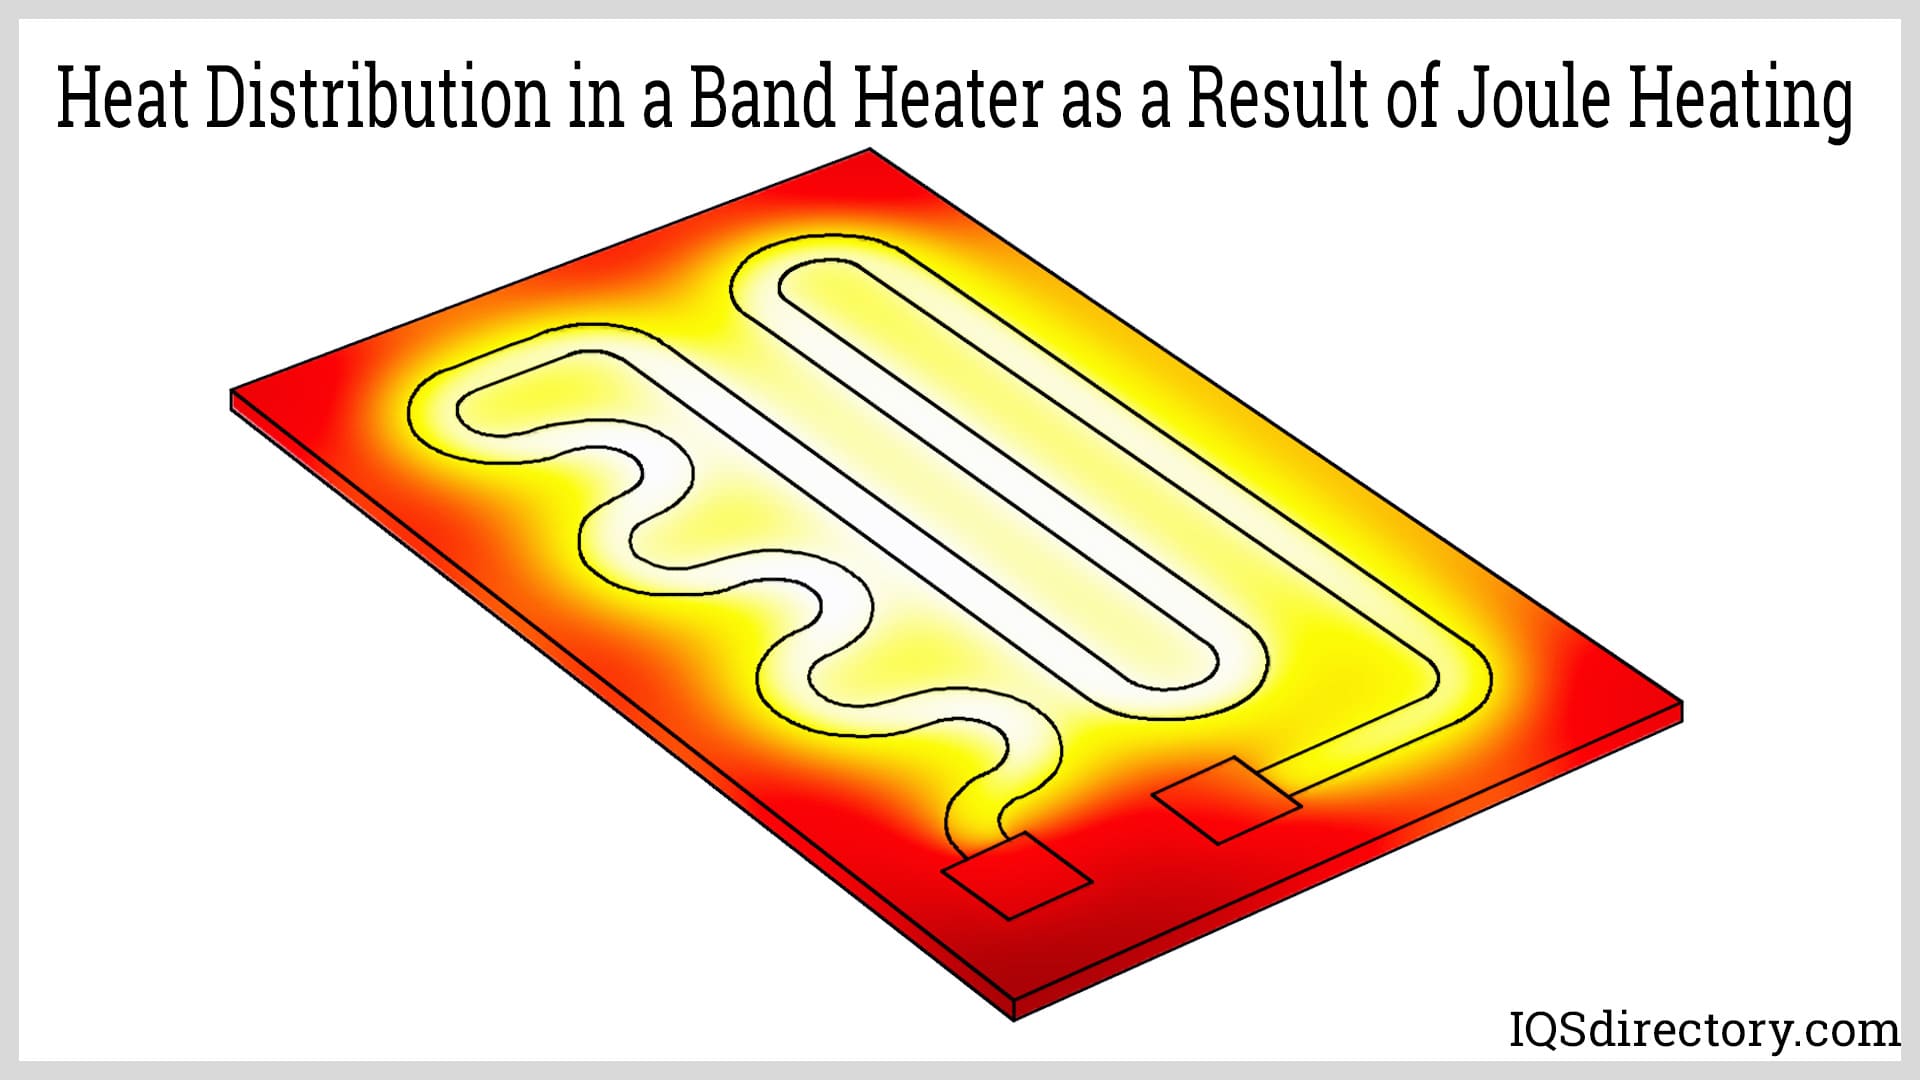 Heat Distribution in a Band Heater as a Result of Joule Heating